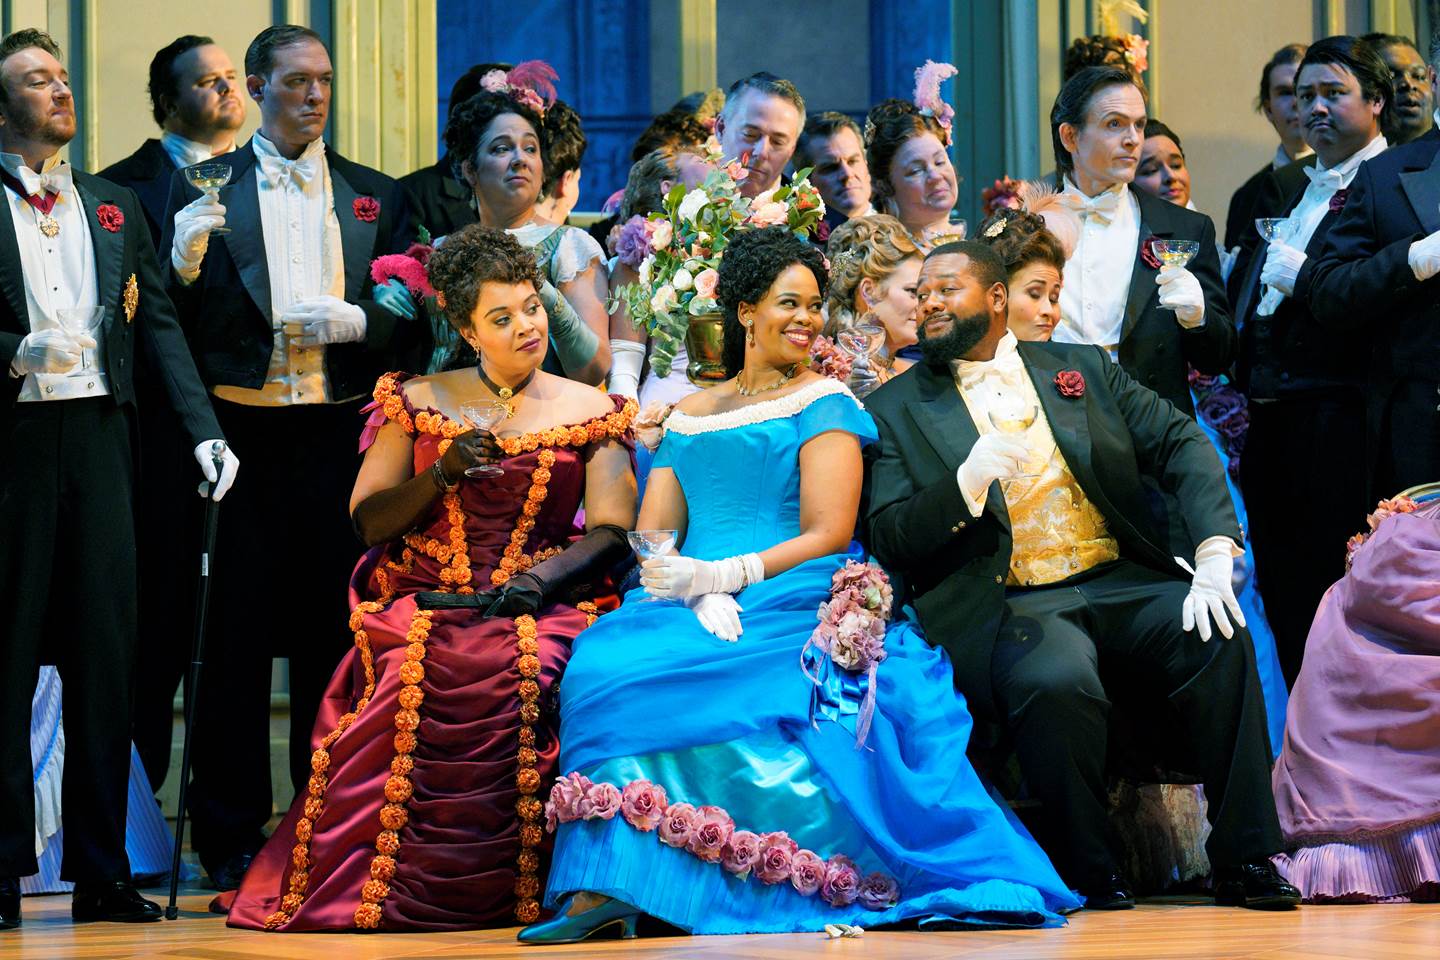 A group of opera performers in lavish 19th-century costumes on stage. Two women in elaborate gowns. sit at the forefront, engaging with each other. They are surrounded by elegantly dressed men and women in formal attire, all holding glasses and appearing to be in a celebratory mood.